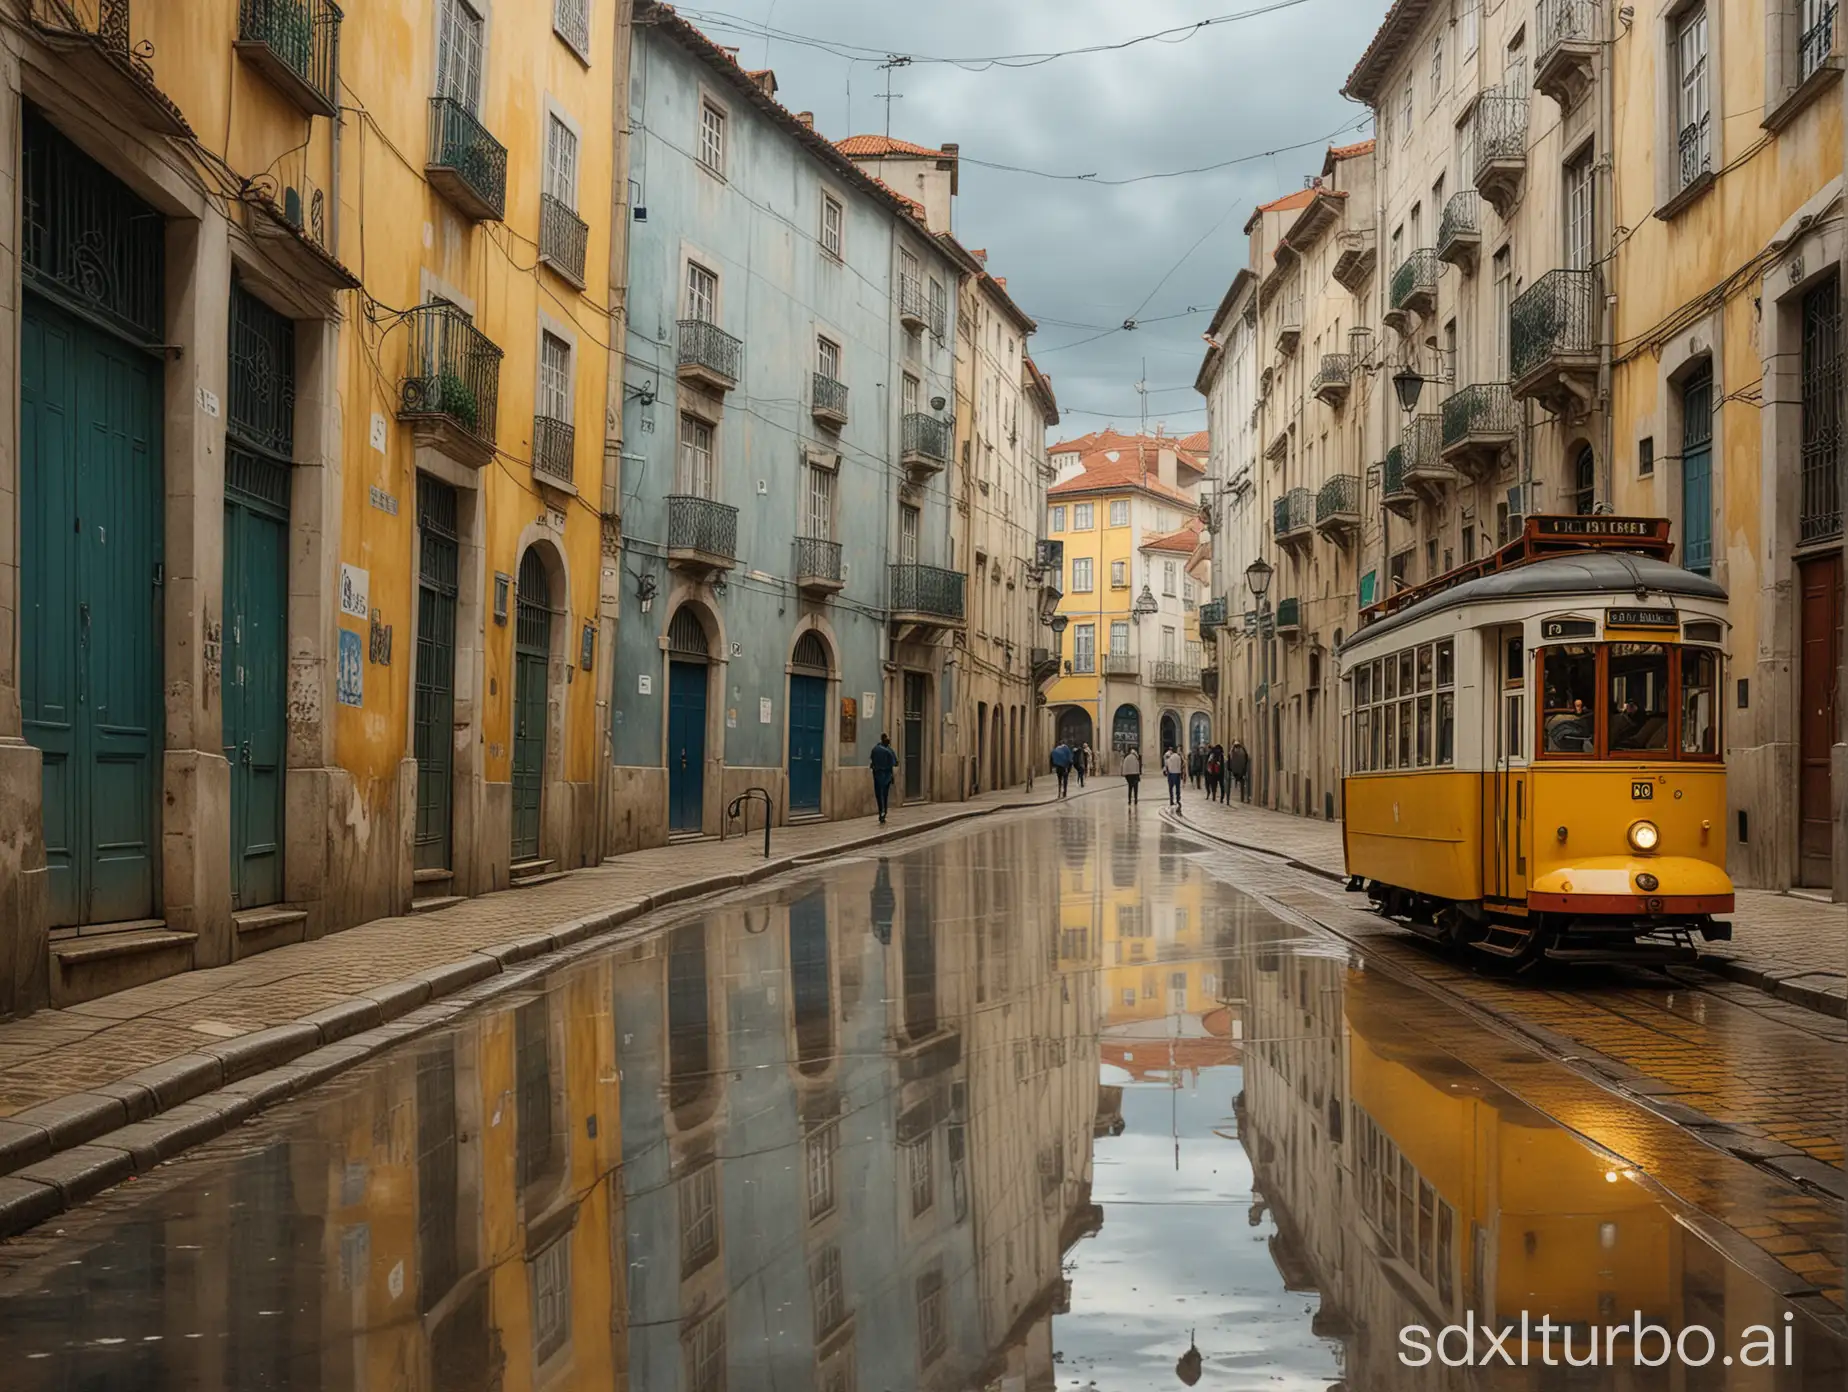 A mesmerizing conceptual oil painting depicting the bustling streets of Lisbon. A yellow tram glides gracefully along cobblestone paths, reflecting the warm ambient light and casting a golden glow on the wet pavement. People with umbrellas move about, their reflections shimmering on the sidewalks. The Portuguese-style architecture is adorned with intricate details, and a striking rooster tile proudly graces the wall of a house. The sky is a beautiful blend of blue and gray, with the occasional raindrop hinting at the recent downpour. This artwork masterfully combines conceptual art, graffiti, wildlife photography, and illustration into a vibrant, enchanting scene that captures the essence of Lisbon's old city., wildlife photography, vibrant, graffiti, conceptual art, illustration